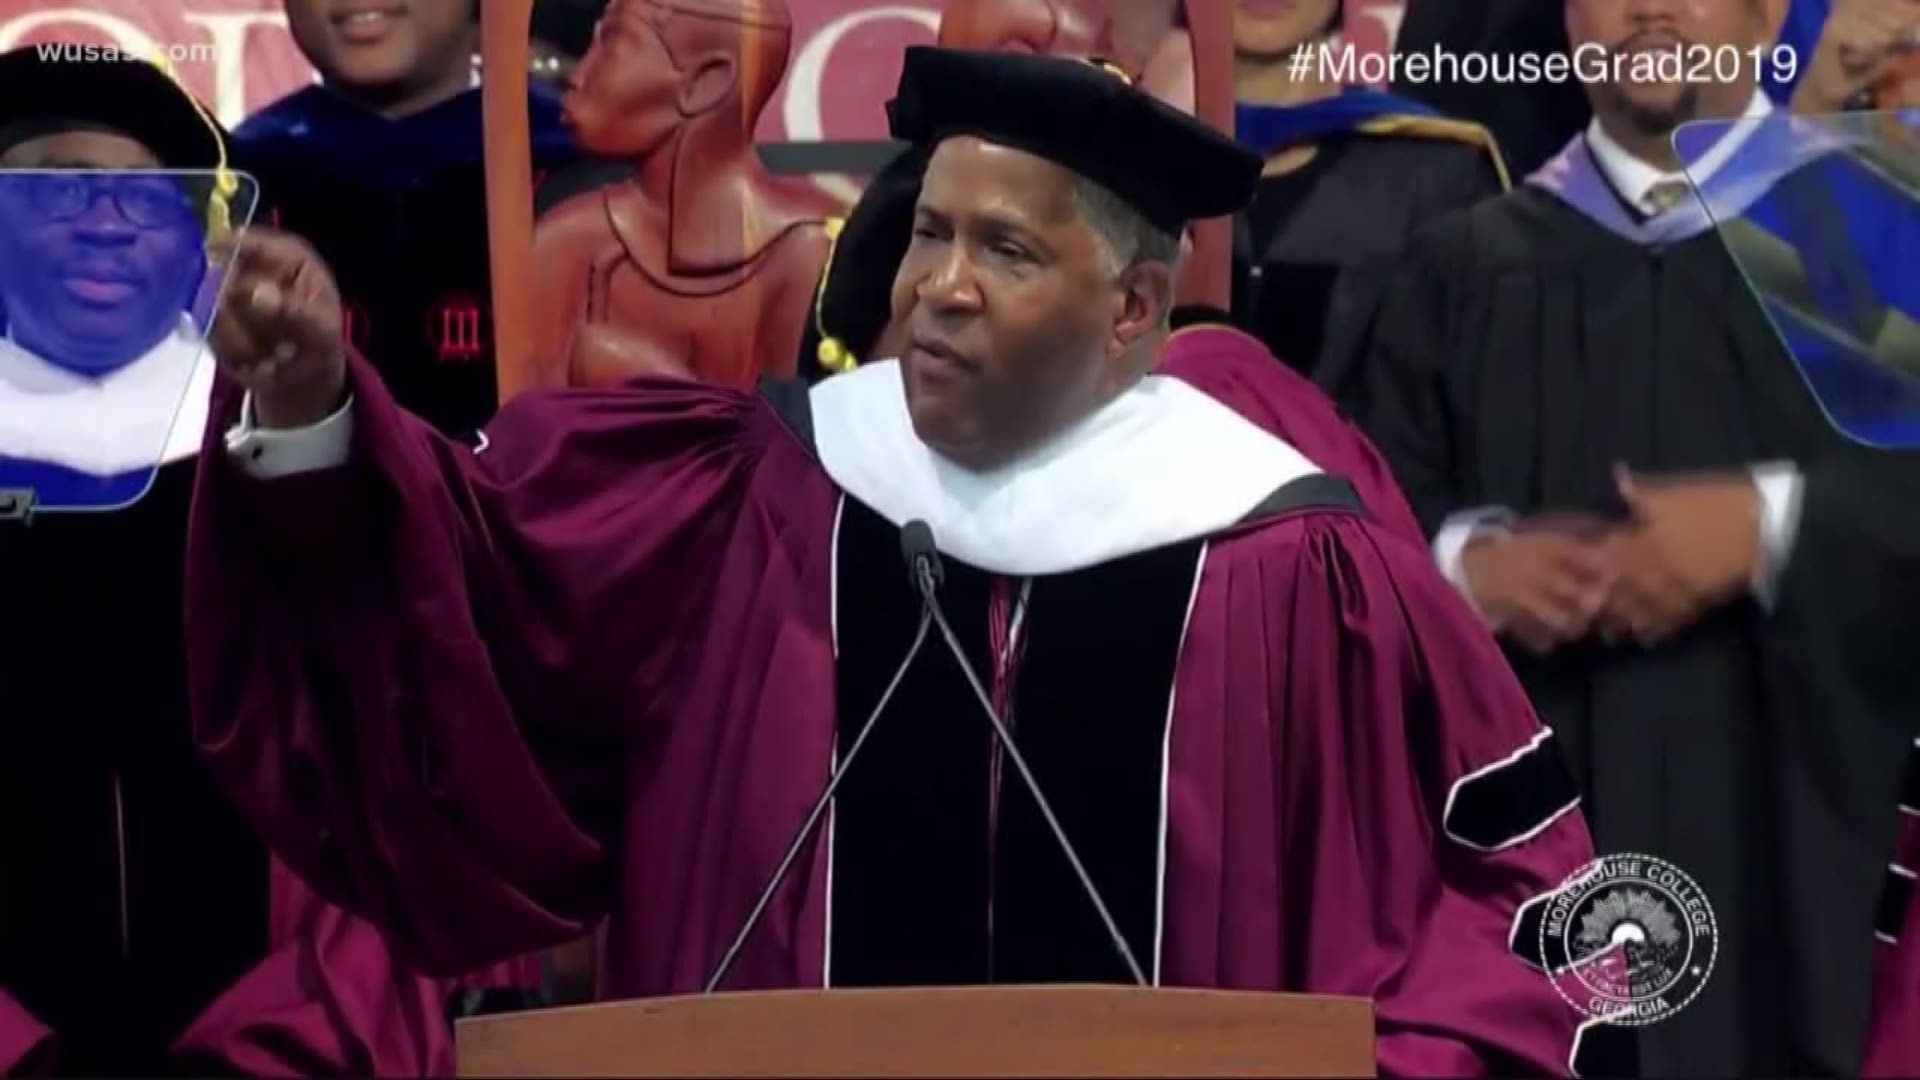 Who is Robert Smith? You probably know him as the guy who is putting up millions of dollars to pay off student loans for Morehouse College graduating students last weekend.